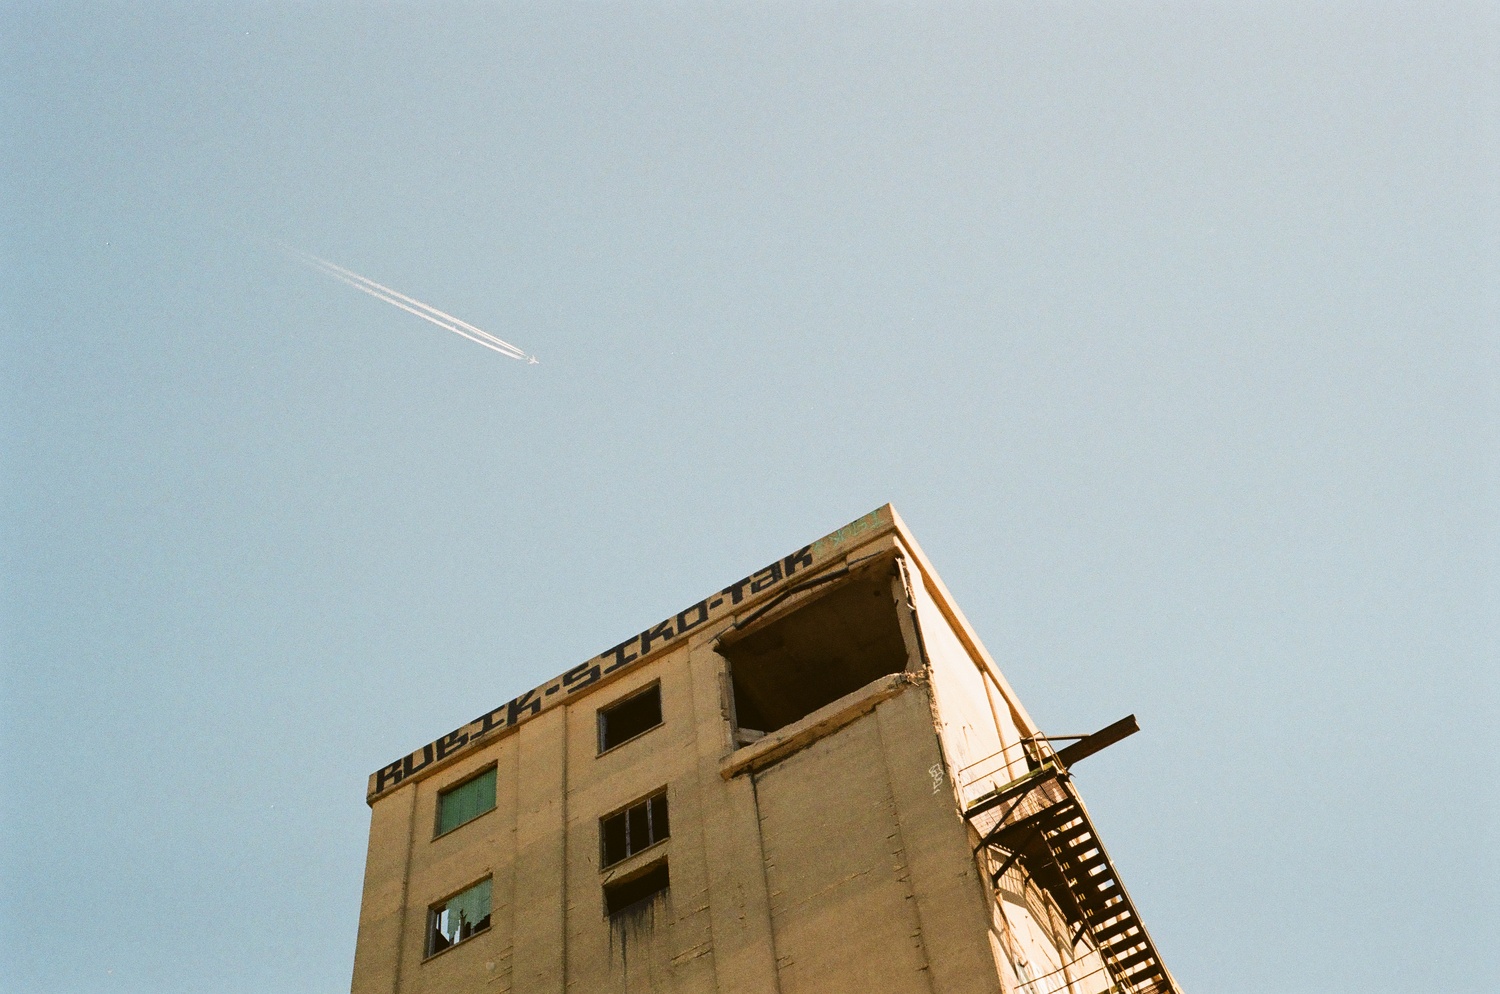 A plane flying over an abandoned building